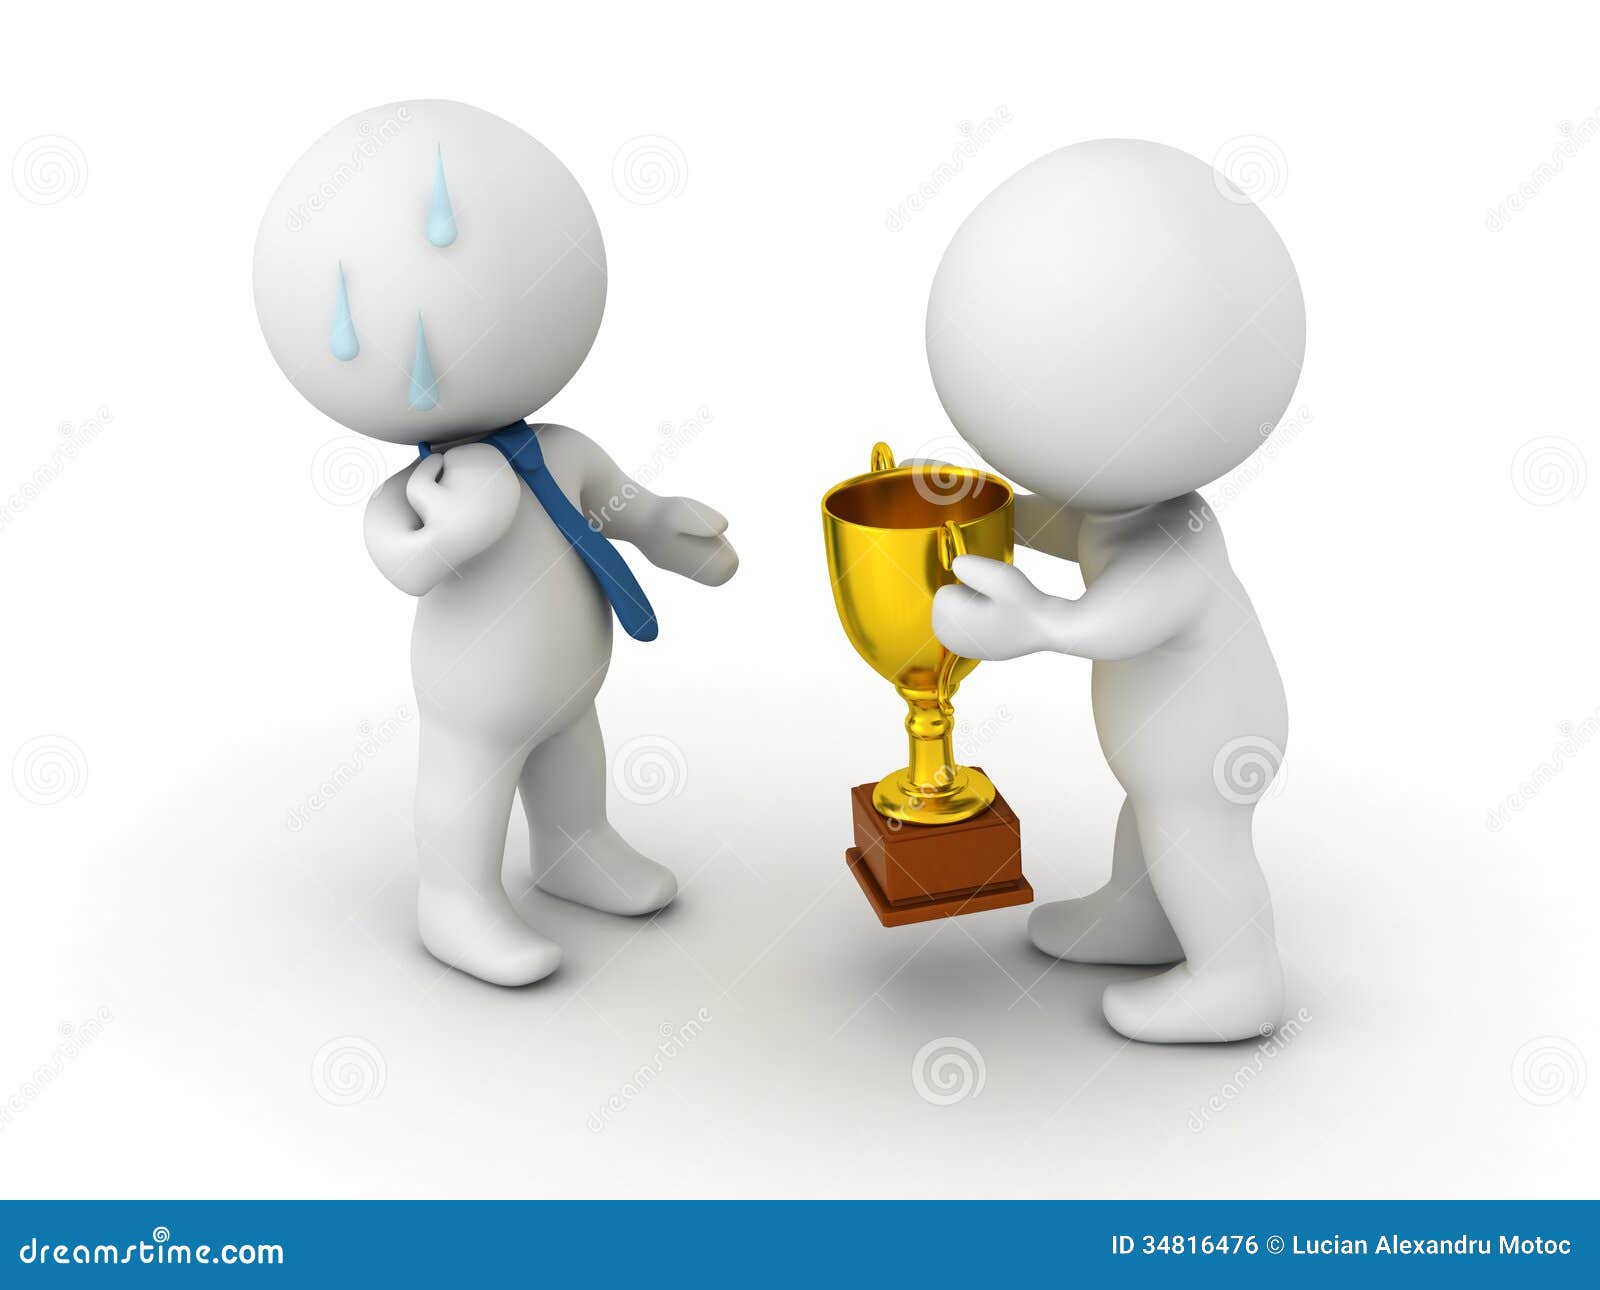 employee recognition clipart - photo #36